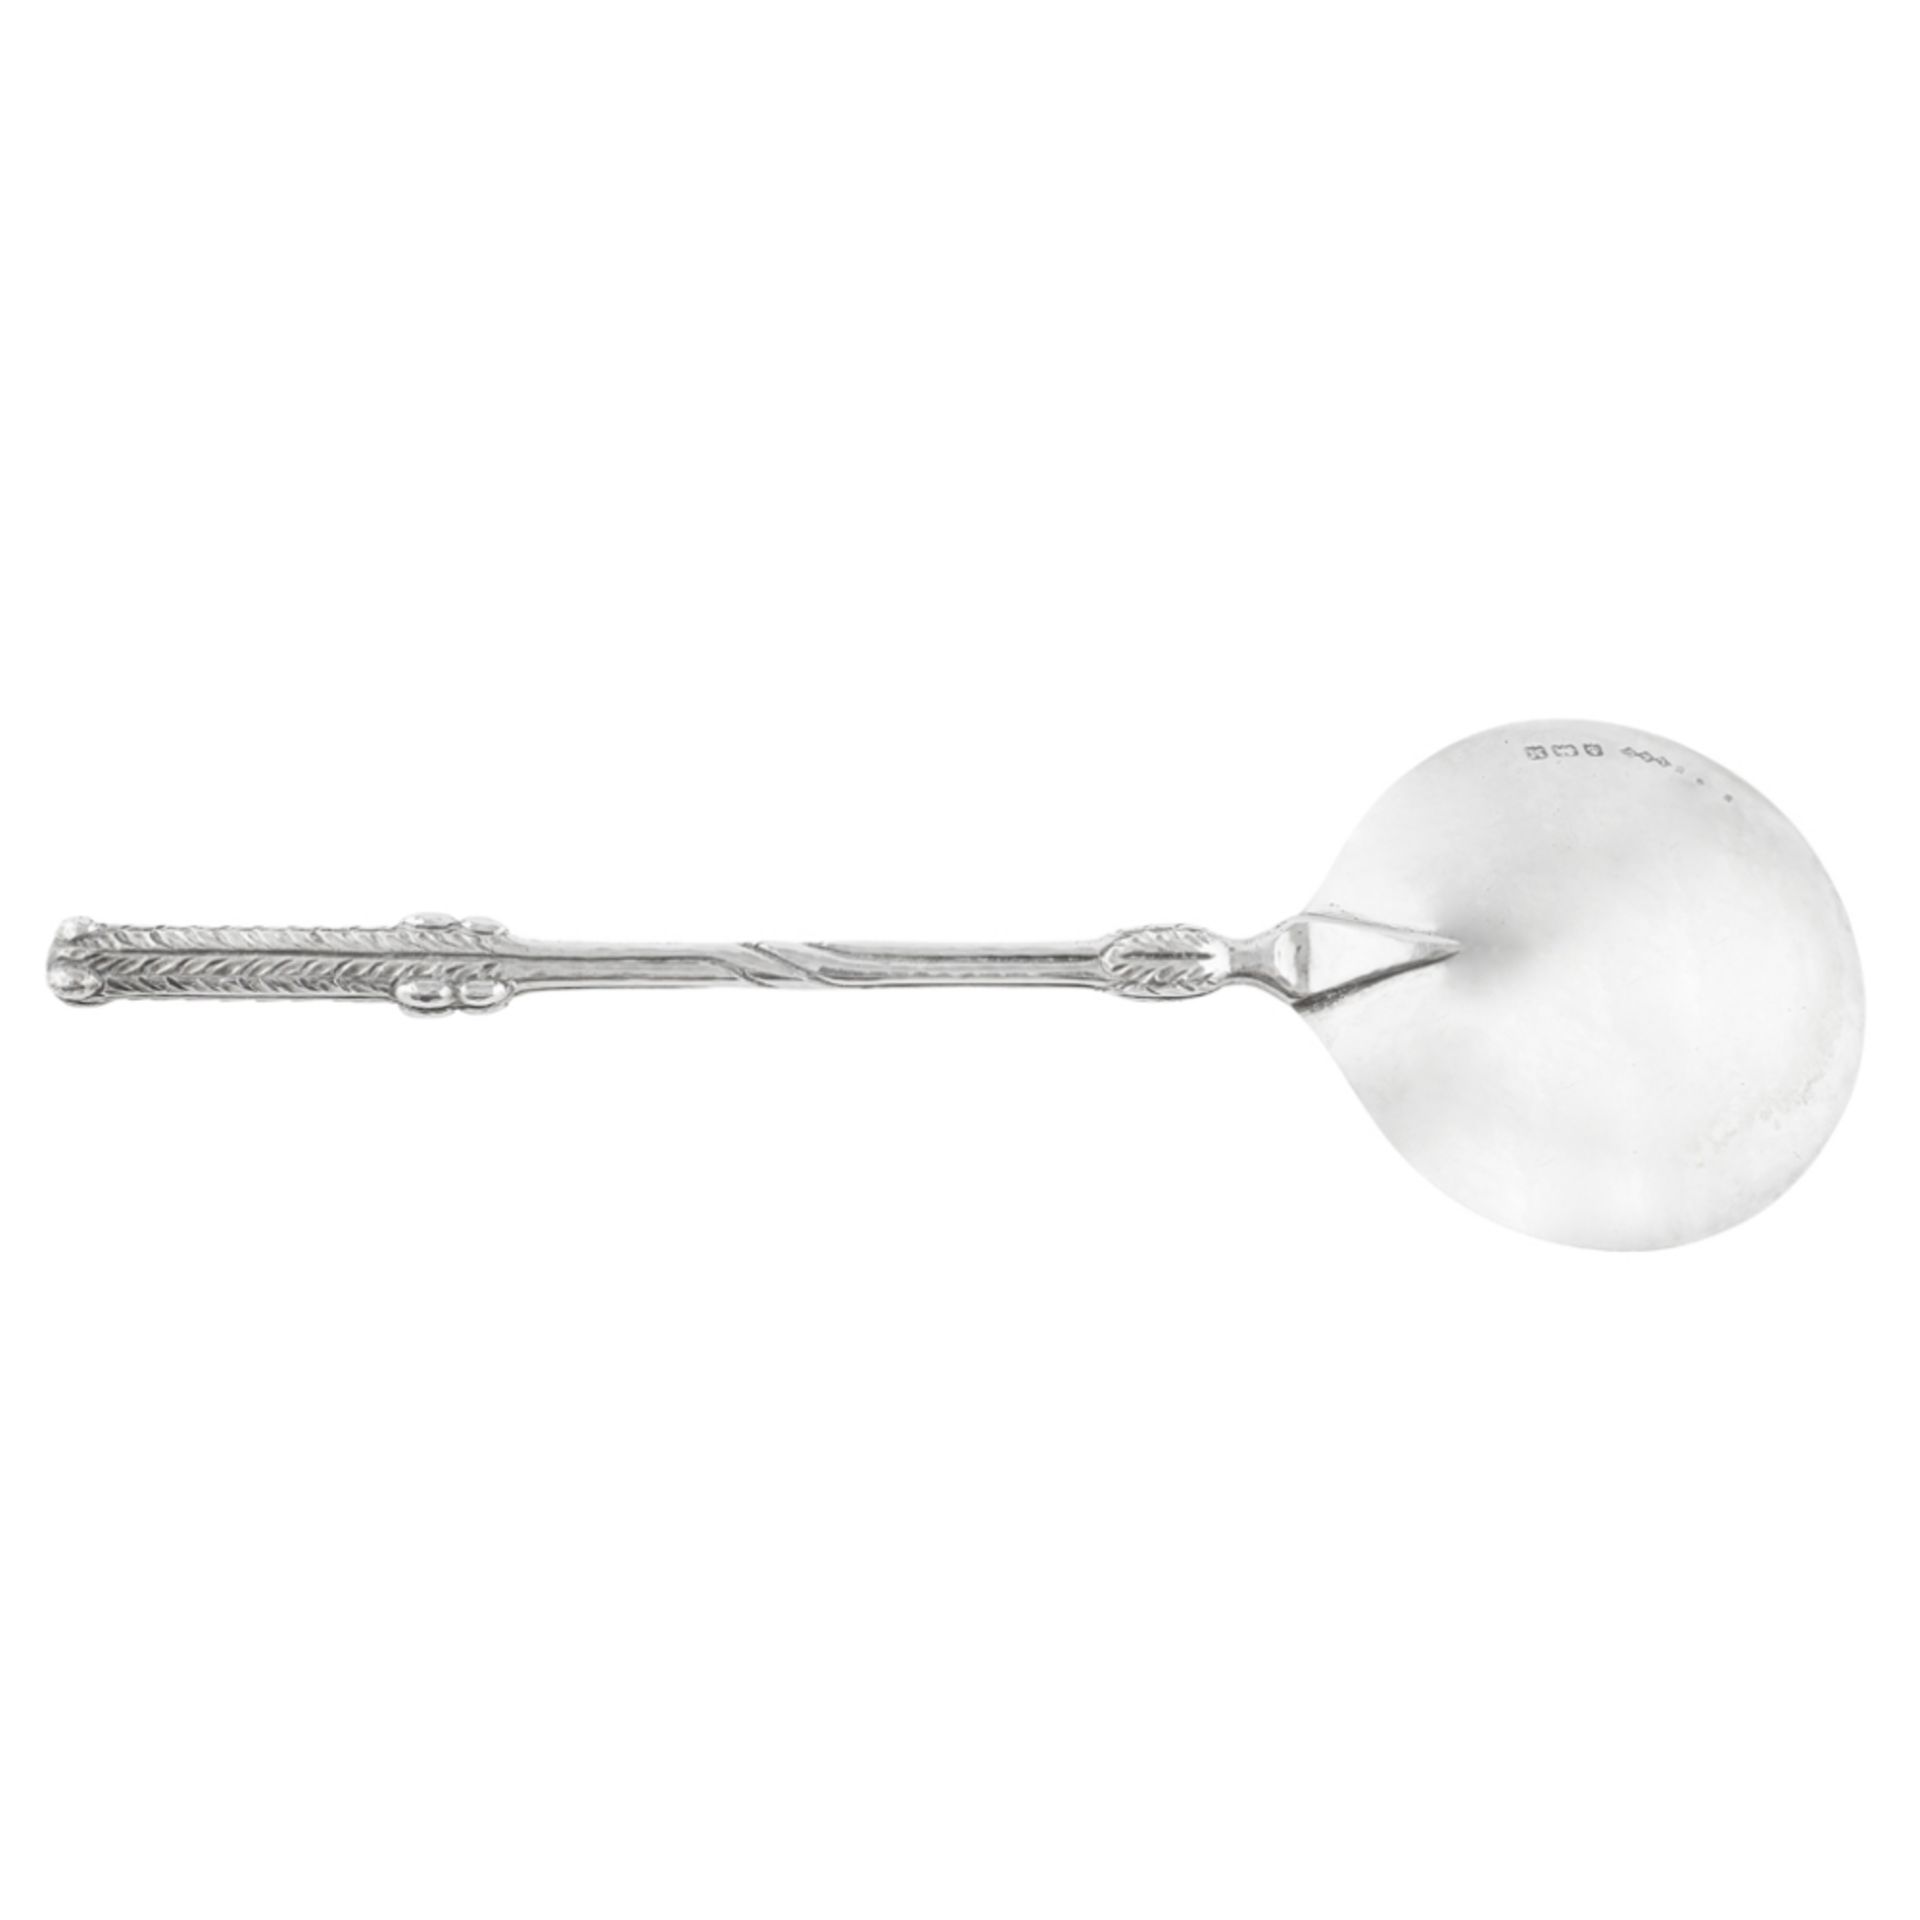 LIBERTY & CO., LONDON ARTS & CRAFTS SILVER SERVING SPOON, BIRMINGHAM 1936 with planished bowl and - Image 2 of 2